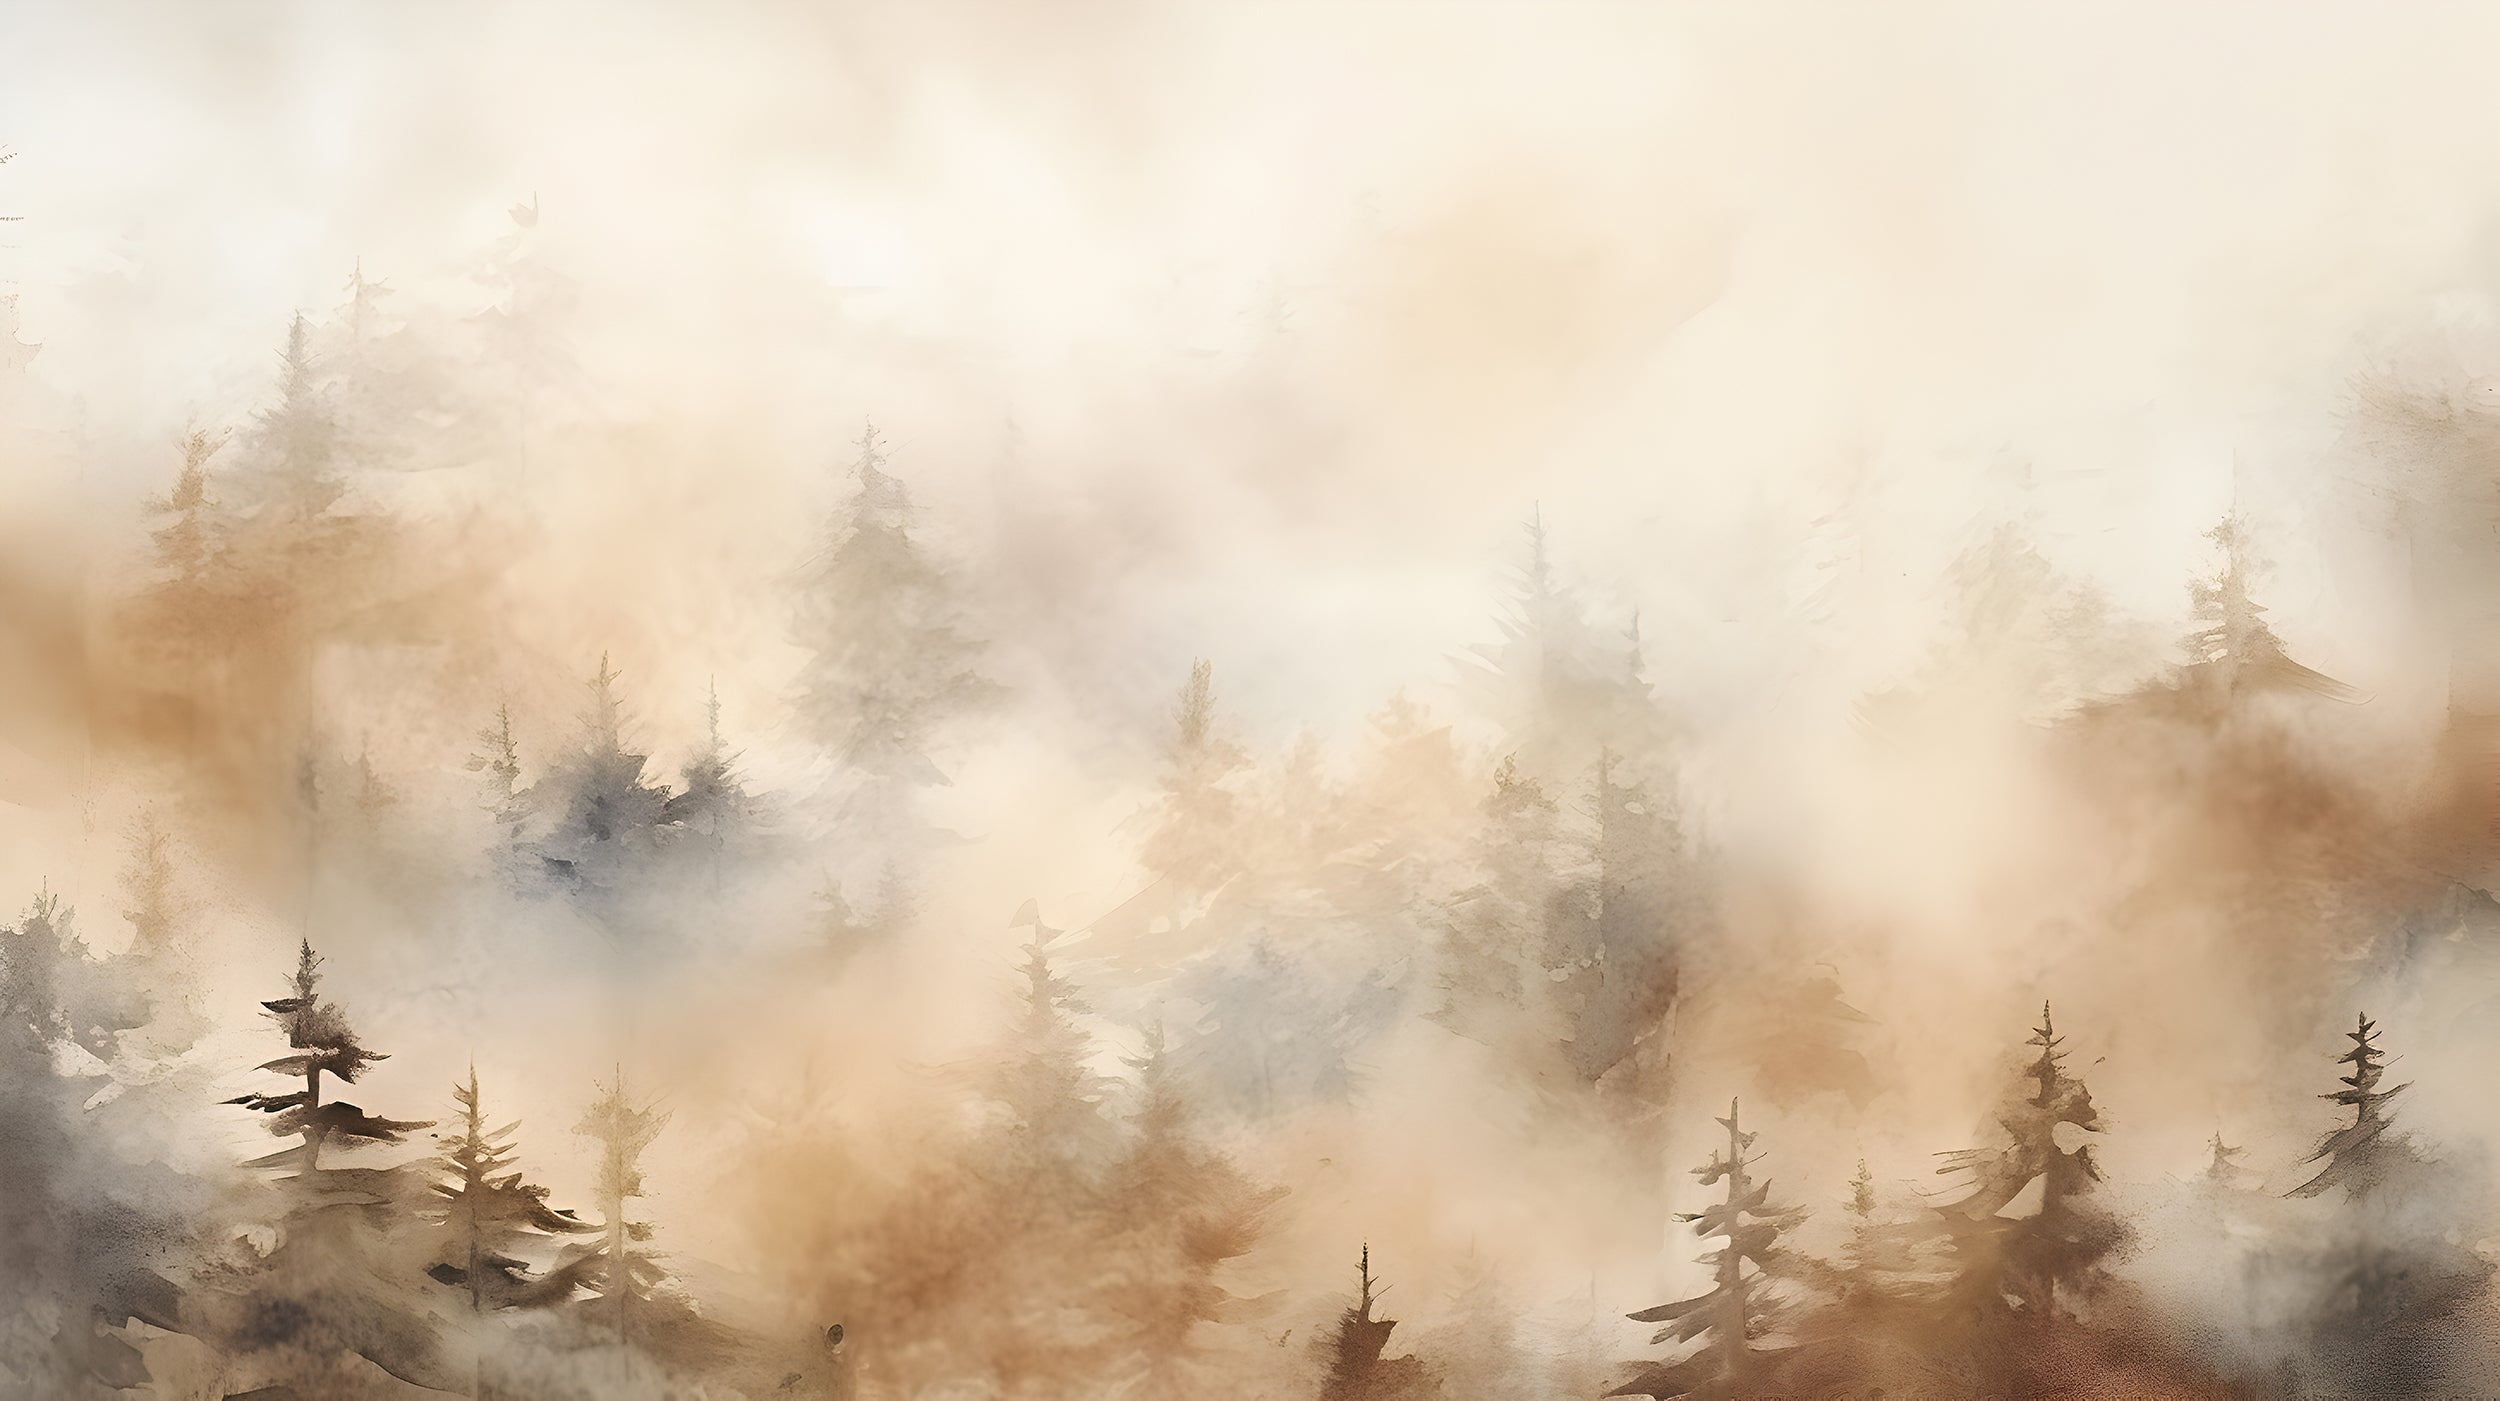 Sepia Tones Foggy Forest Wall Art with Timeless Appeal